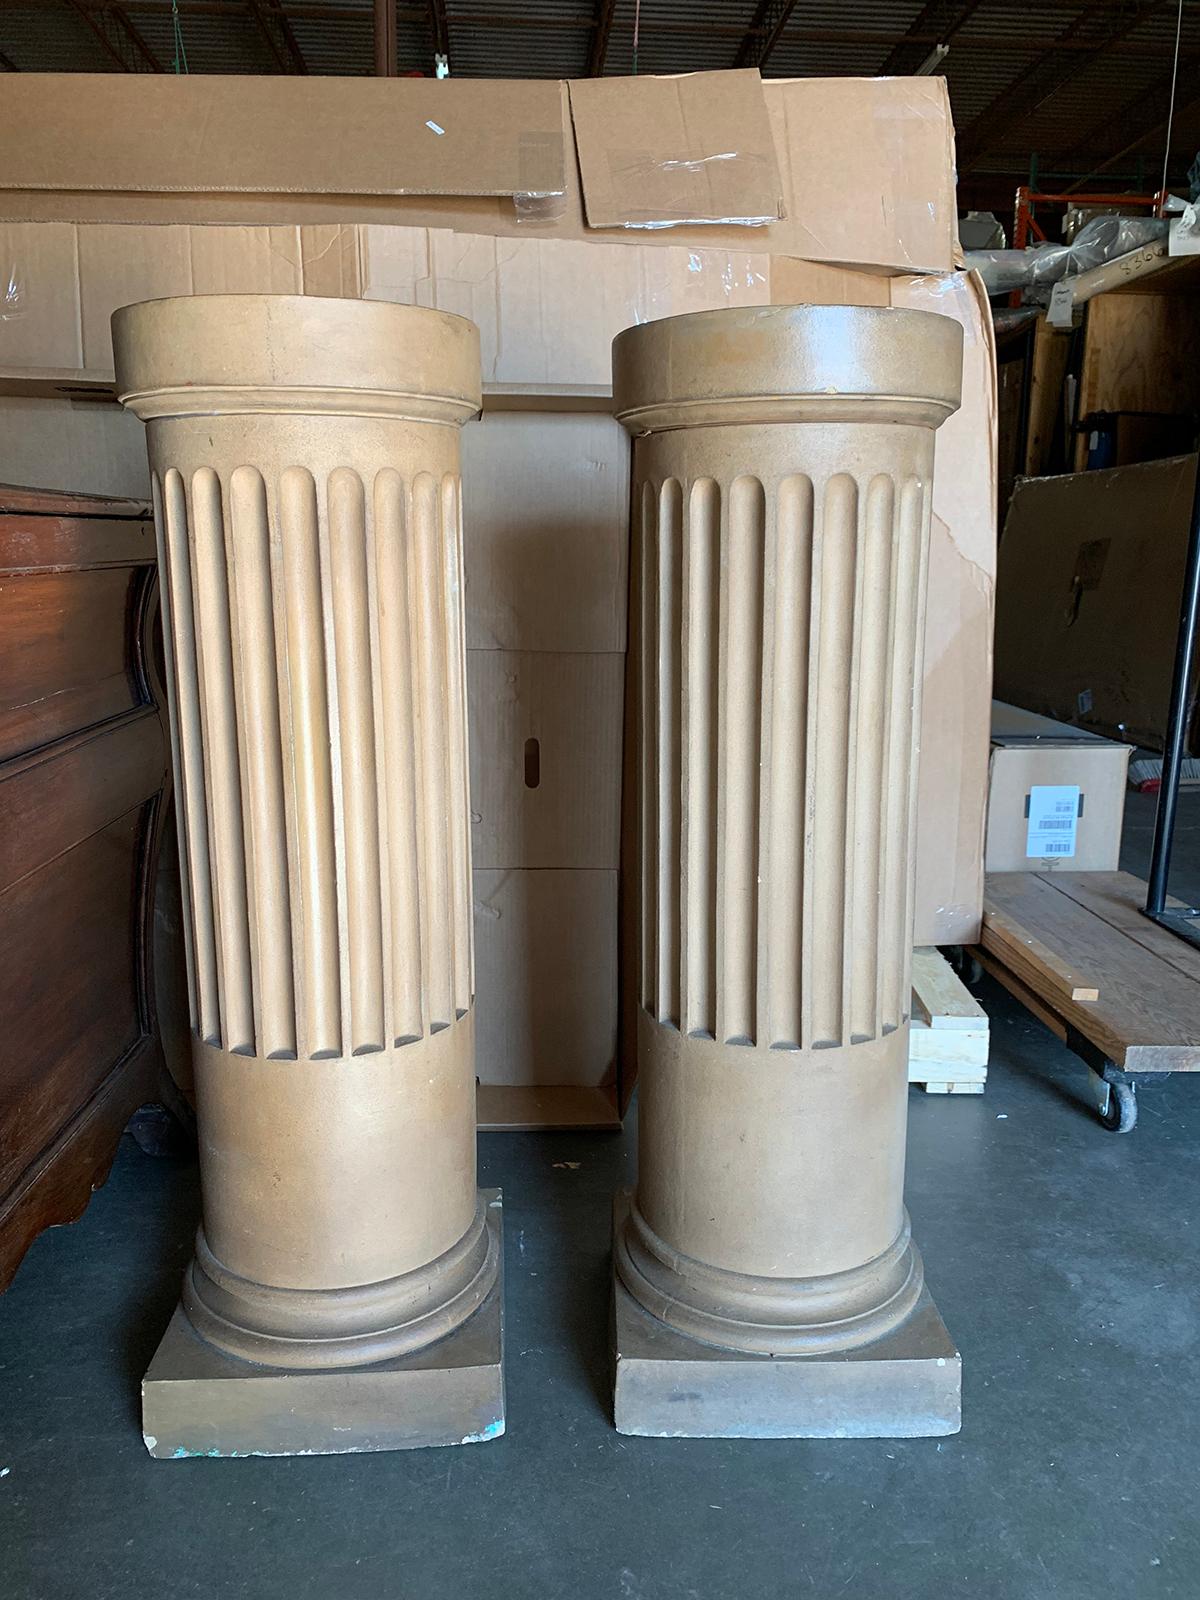 Pair of 19th century English Faience column pedestals, possibly Rookwood
Measures: 13